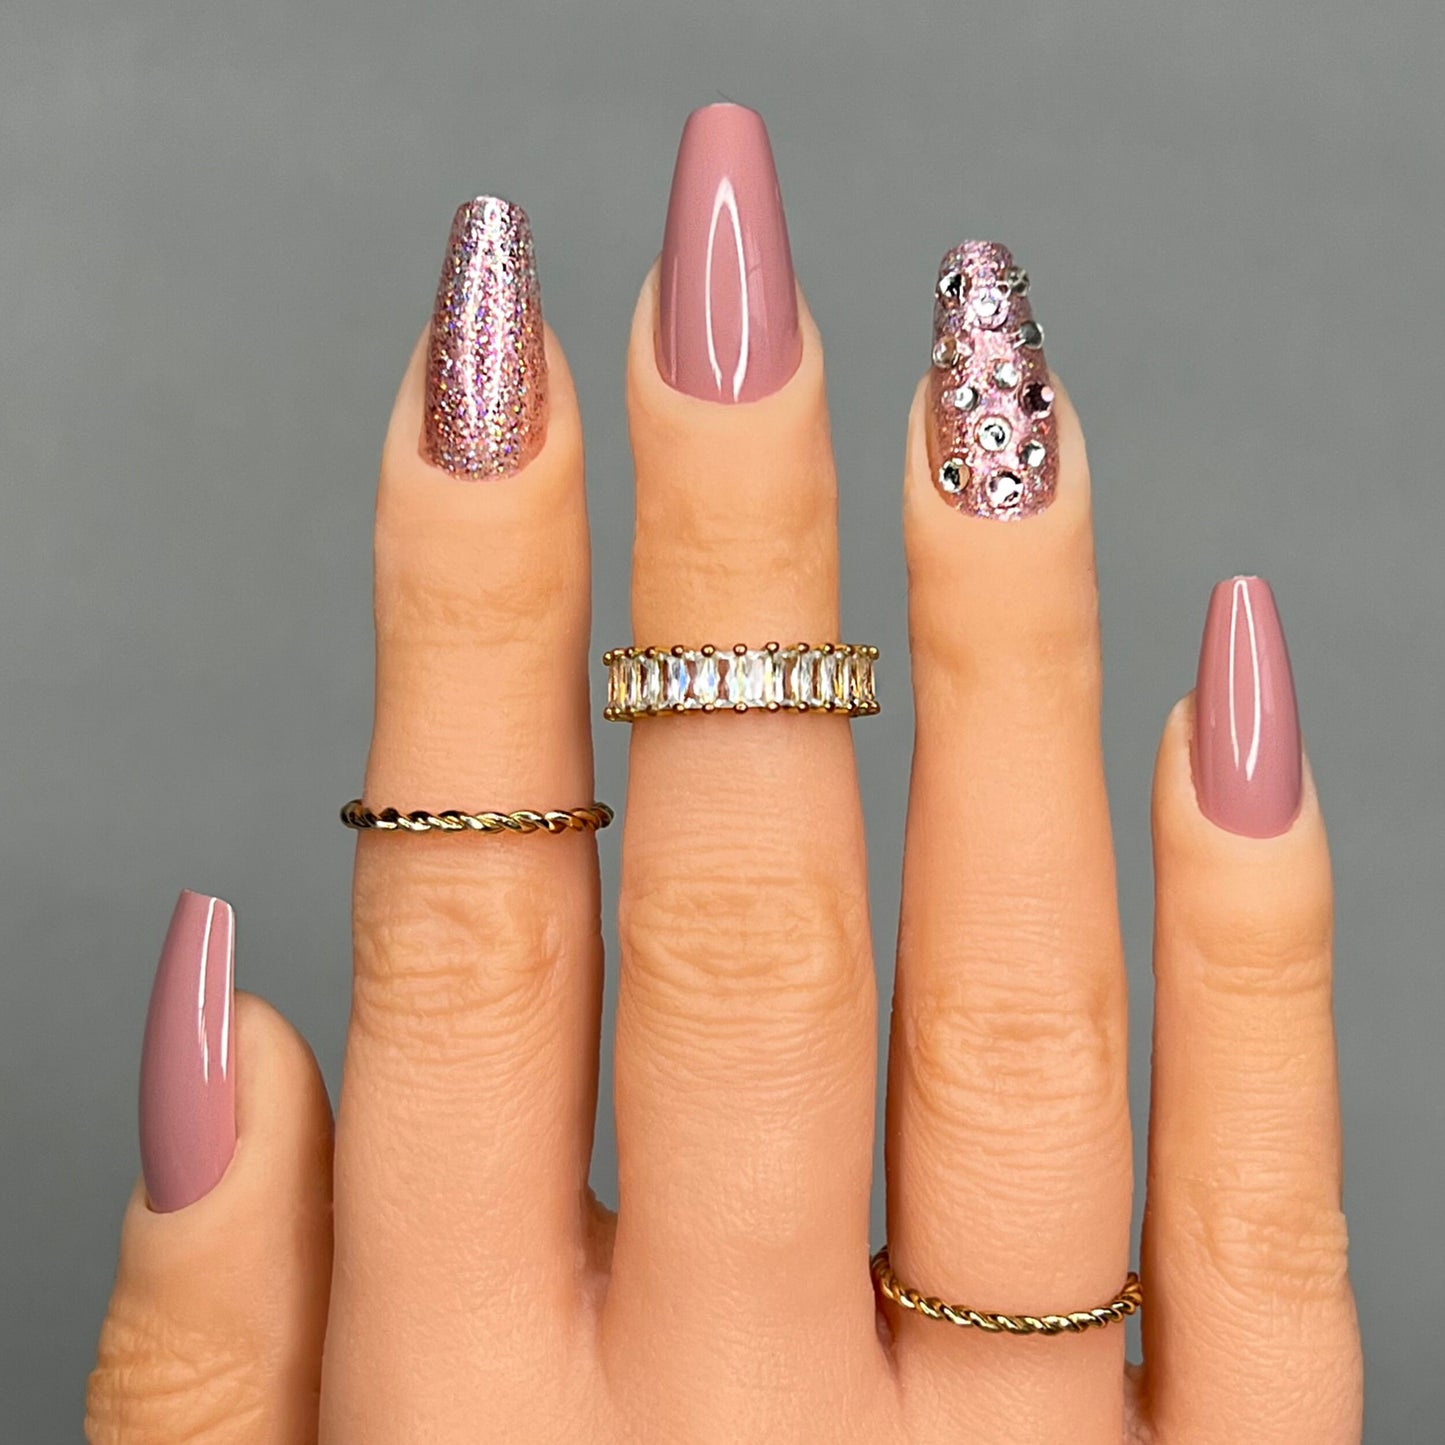 Mauve Press On Nails With Rhinestones and Glitter | Press On Nails | Fake Nails | False Nails | Glue On Nails